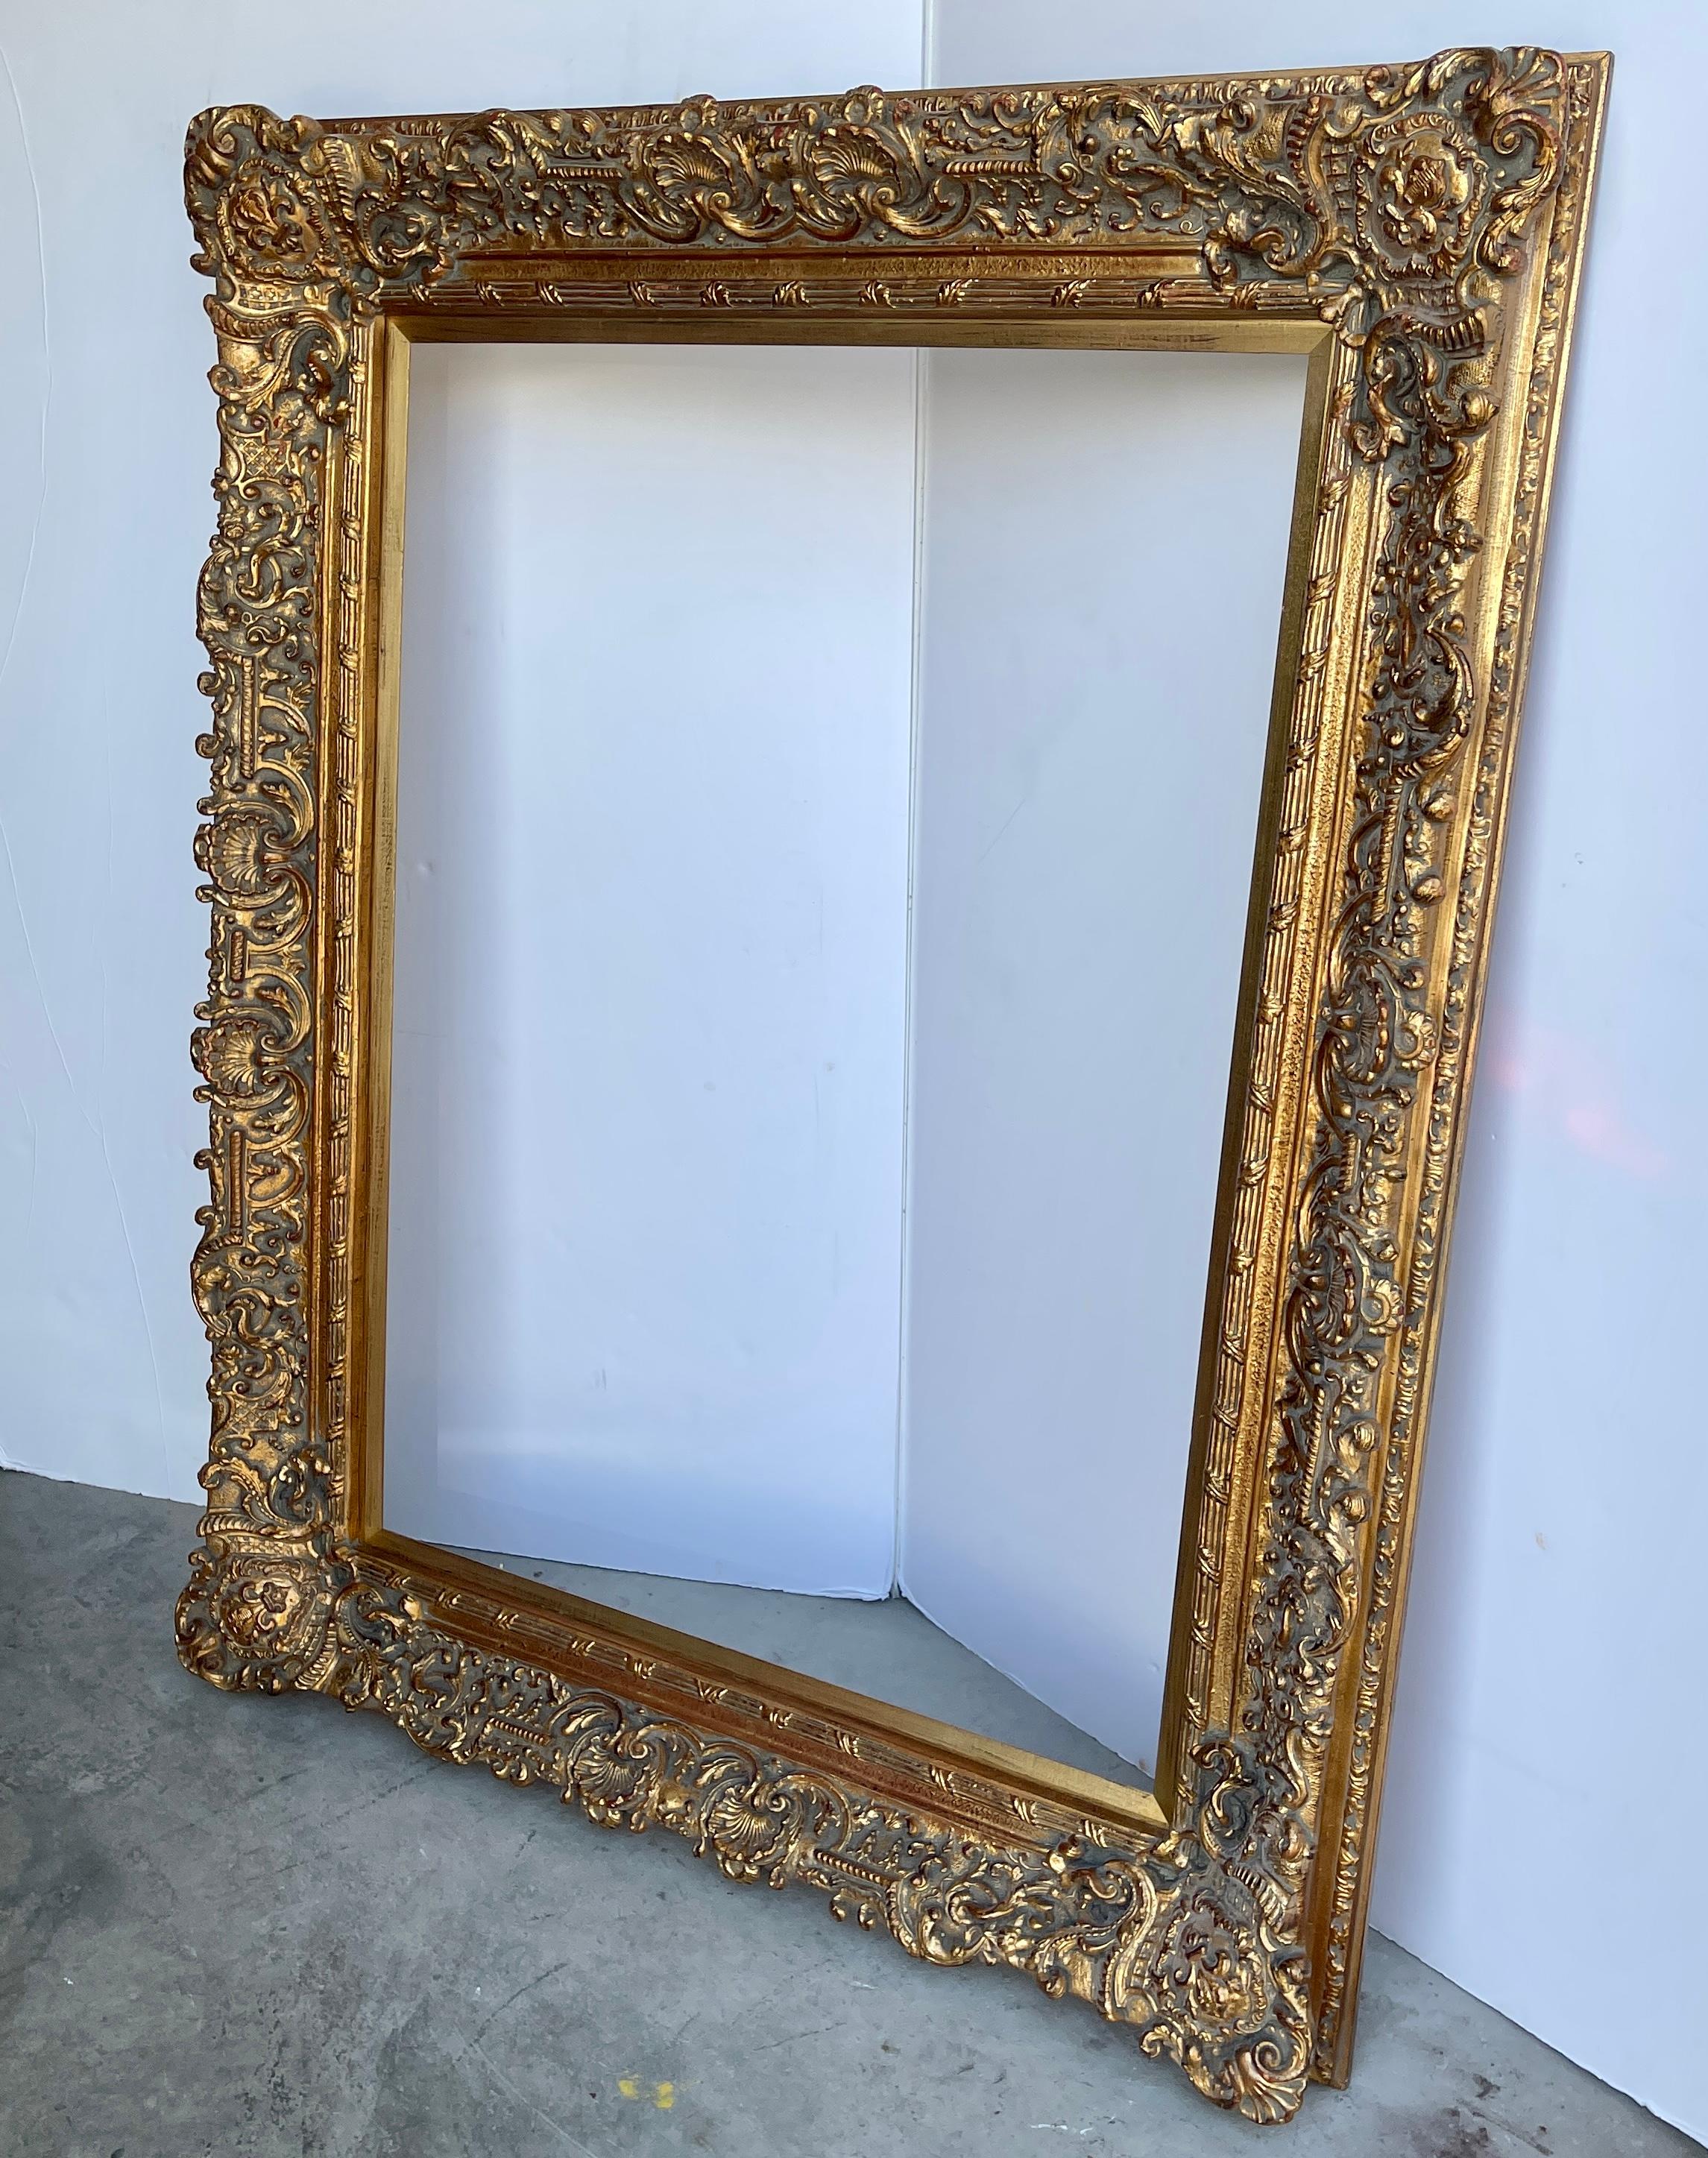 Large Ornate French Rococo Style Carved Ornate Gilt Wood Frame.

This gorgeous hand-crafted frame has lots of charming details including fleur de lis in the corners, shell motifs as well as other fantastic features. This substantial piece could be